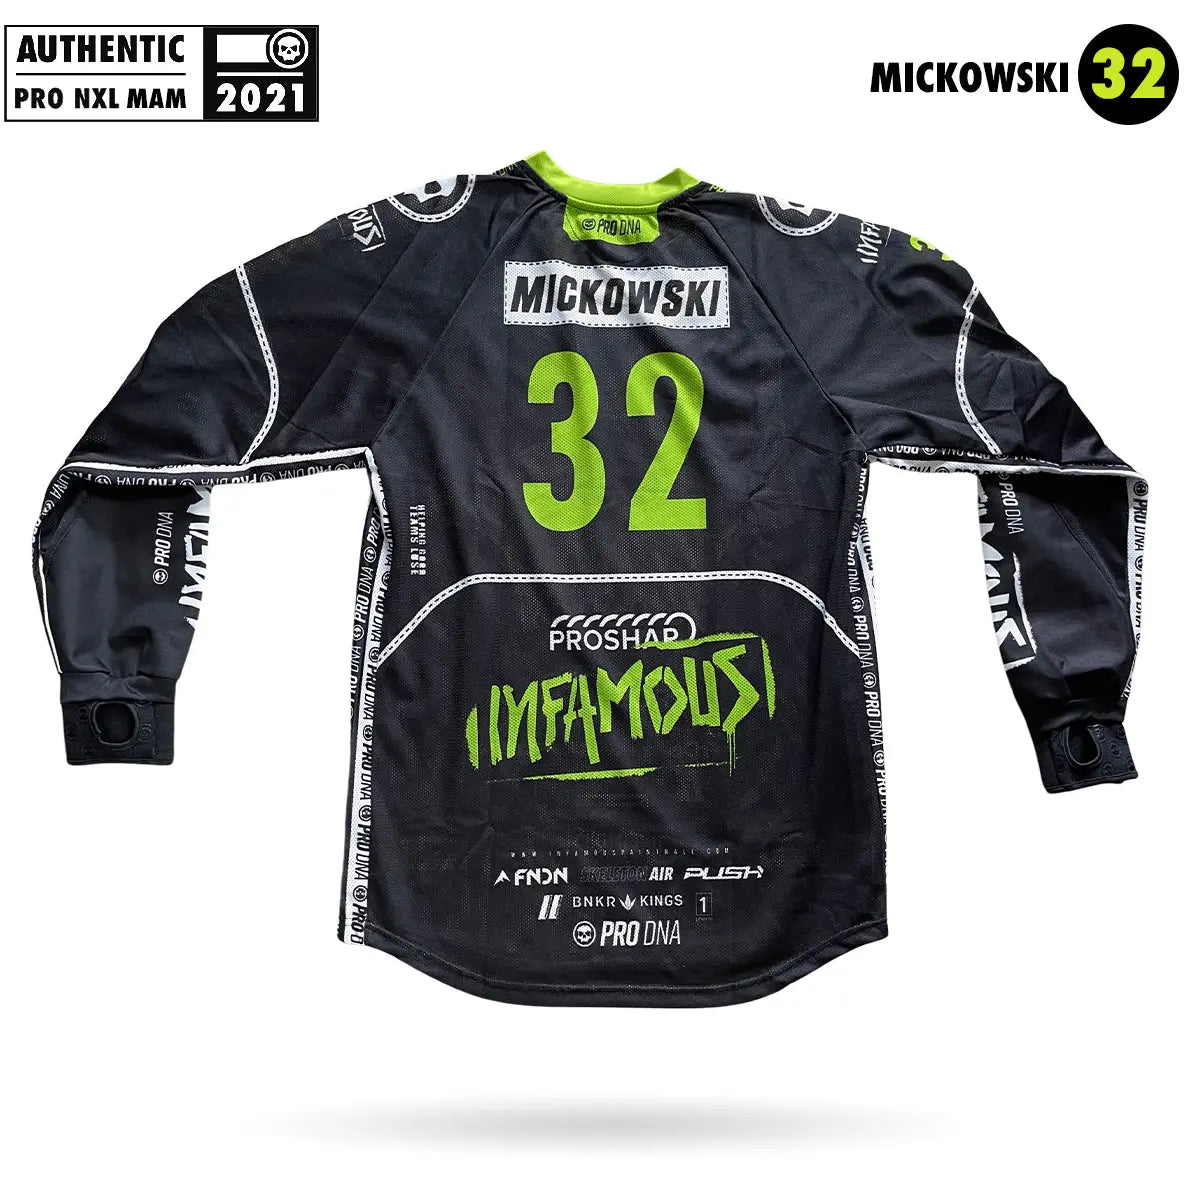 INFAMOUS HOME JERSEY - NXL MAM 2021 - MICKOWSKI Infamous Paintball